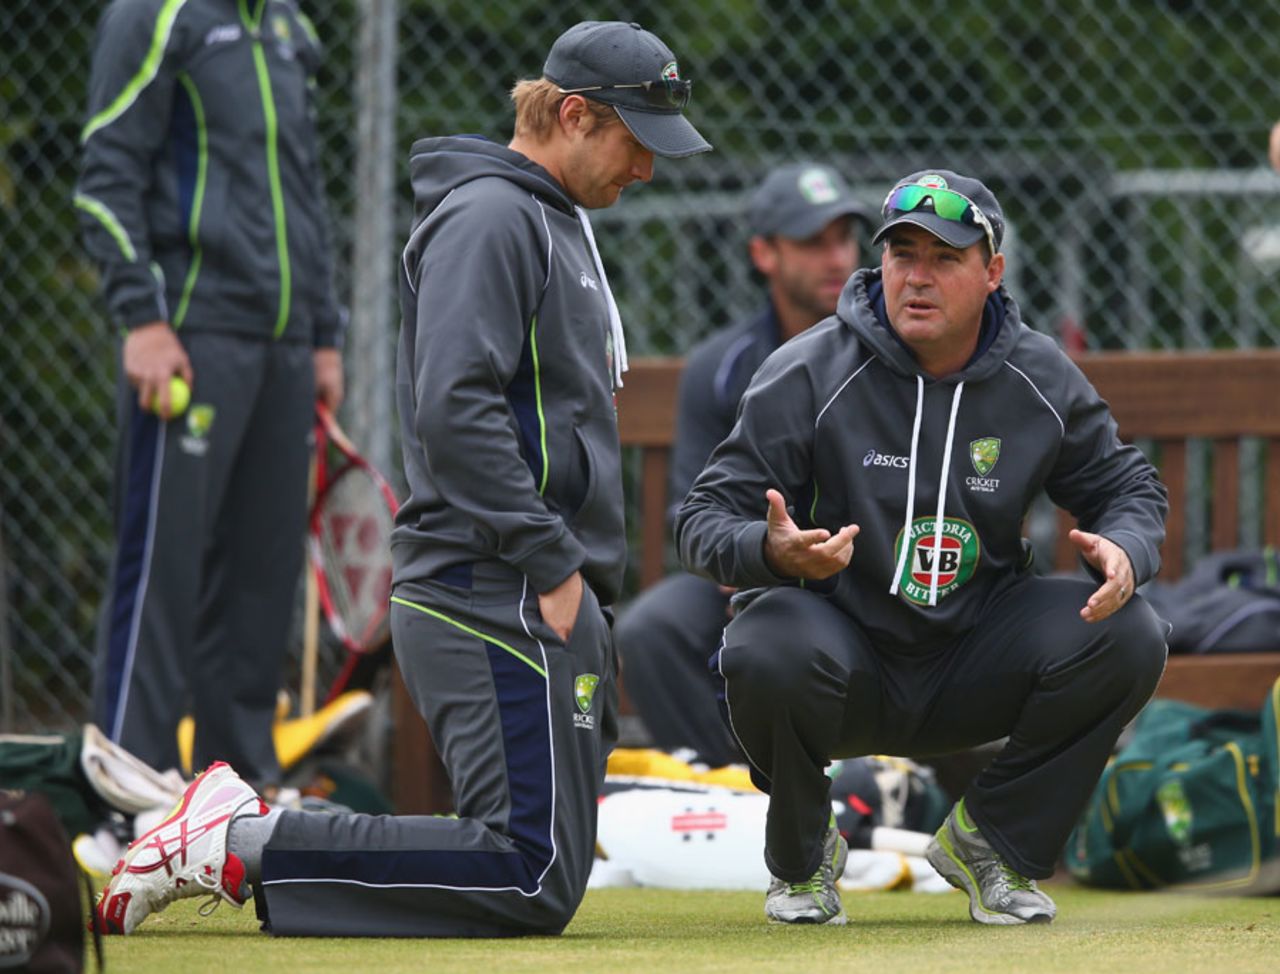 Shane Watson and Mickey Arthur at a practice session before their match against New Zealand, Edgbaston, June 11, 2013